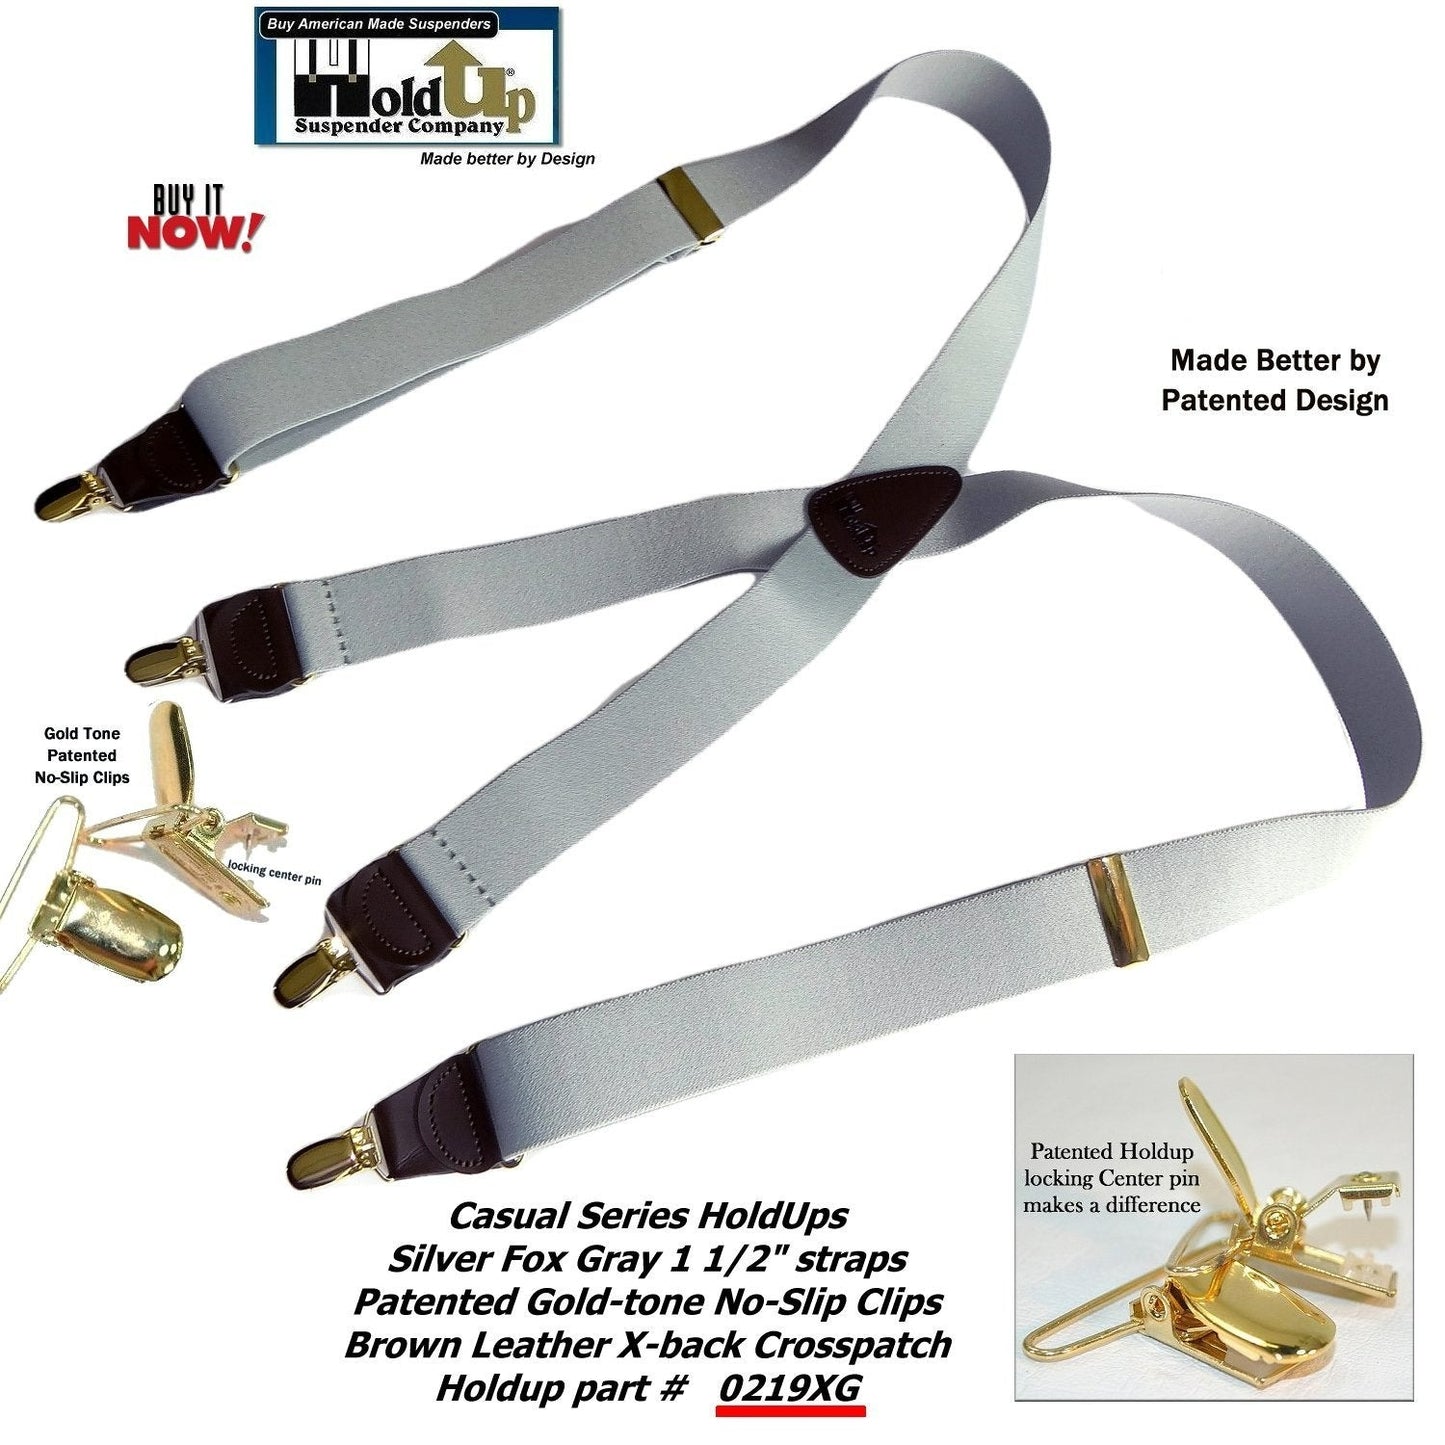 Holdup Brand Silver Fox Light Gray X-back Suspenders with USA Patented Gold-tone no-slip Clips